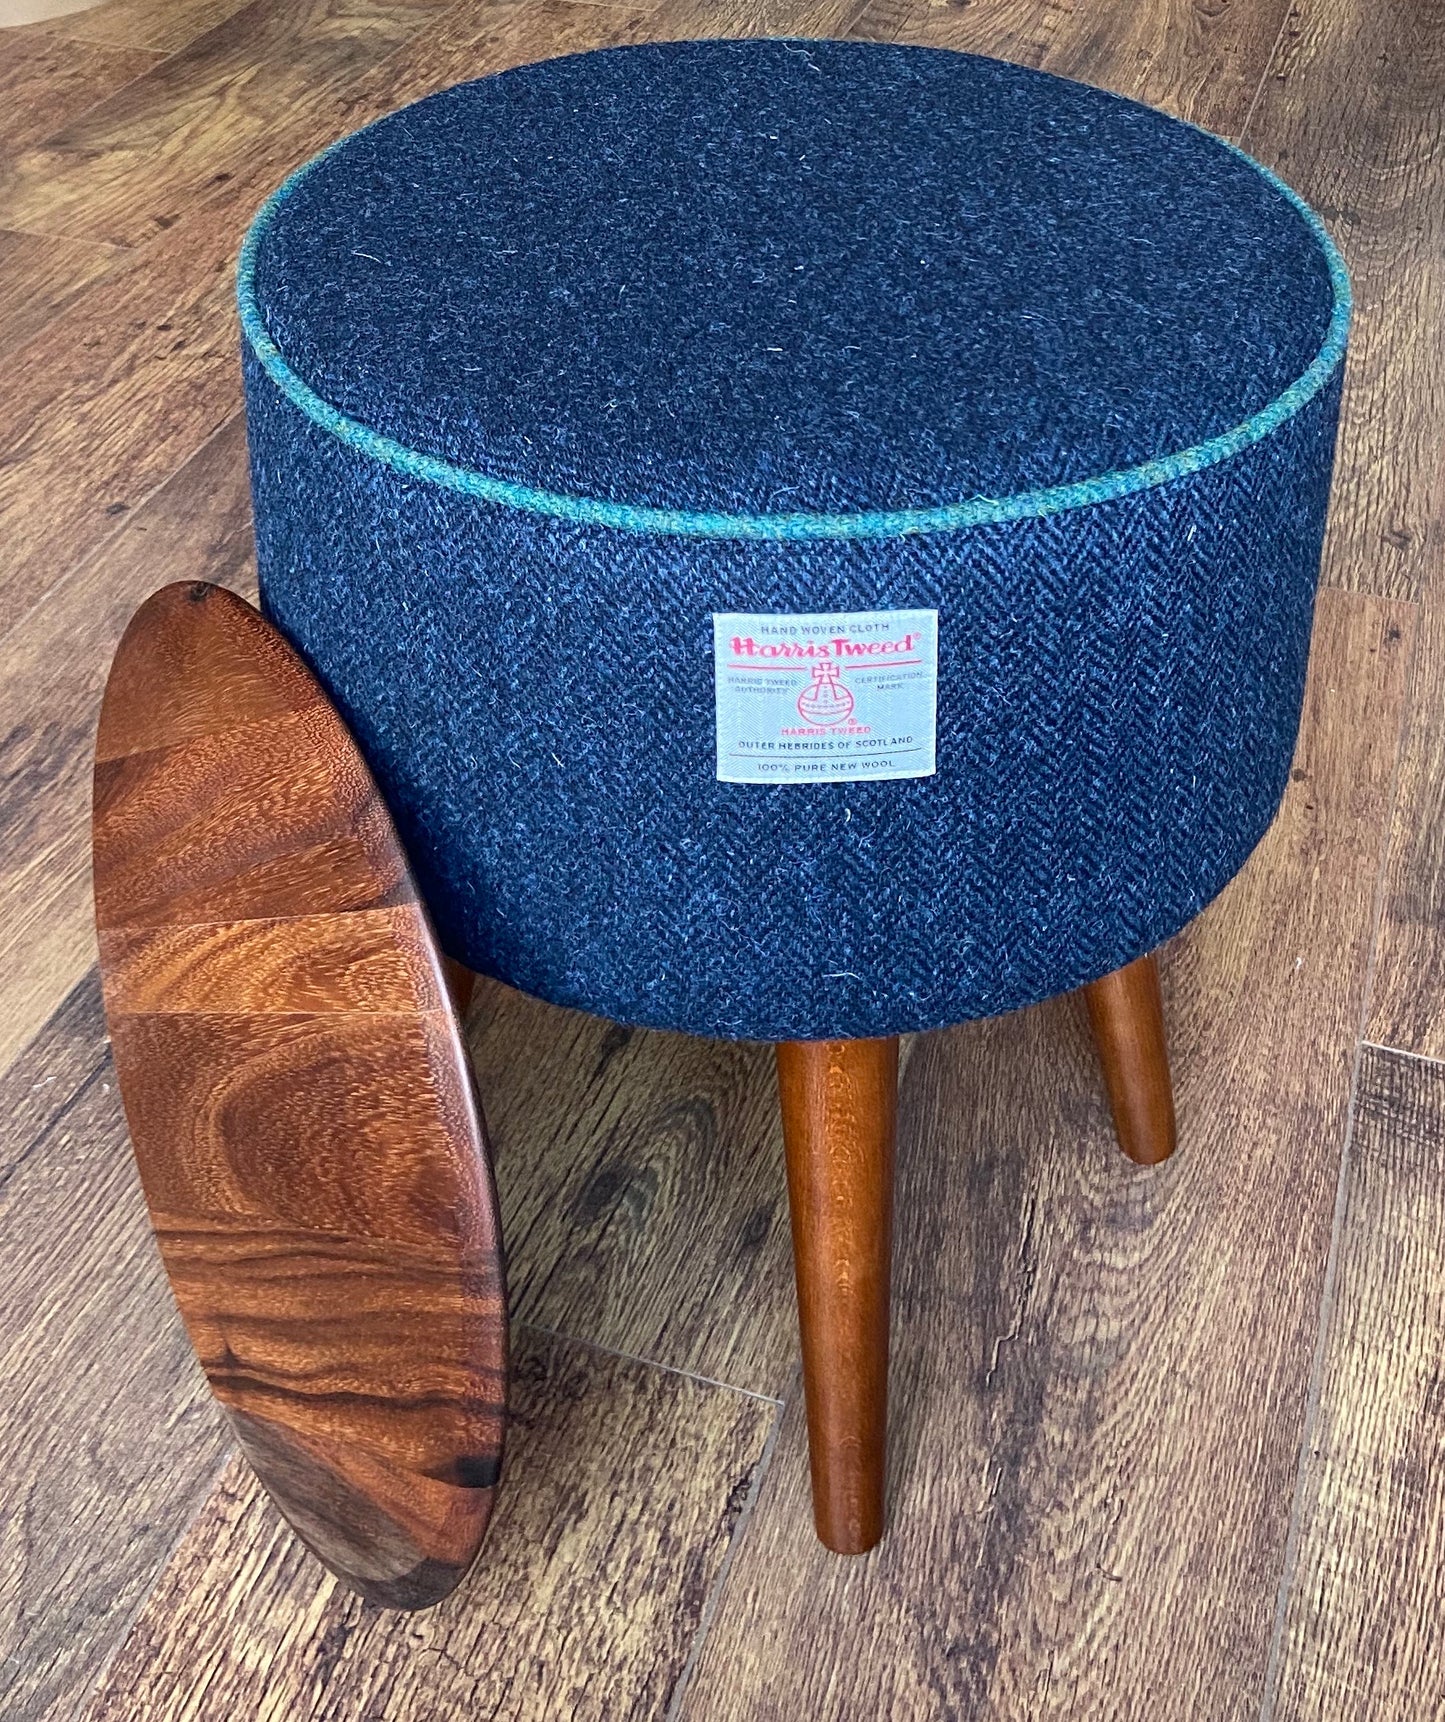 End Table, Navy Harris Tweed with Green Piping and Removable Wooden Top